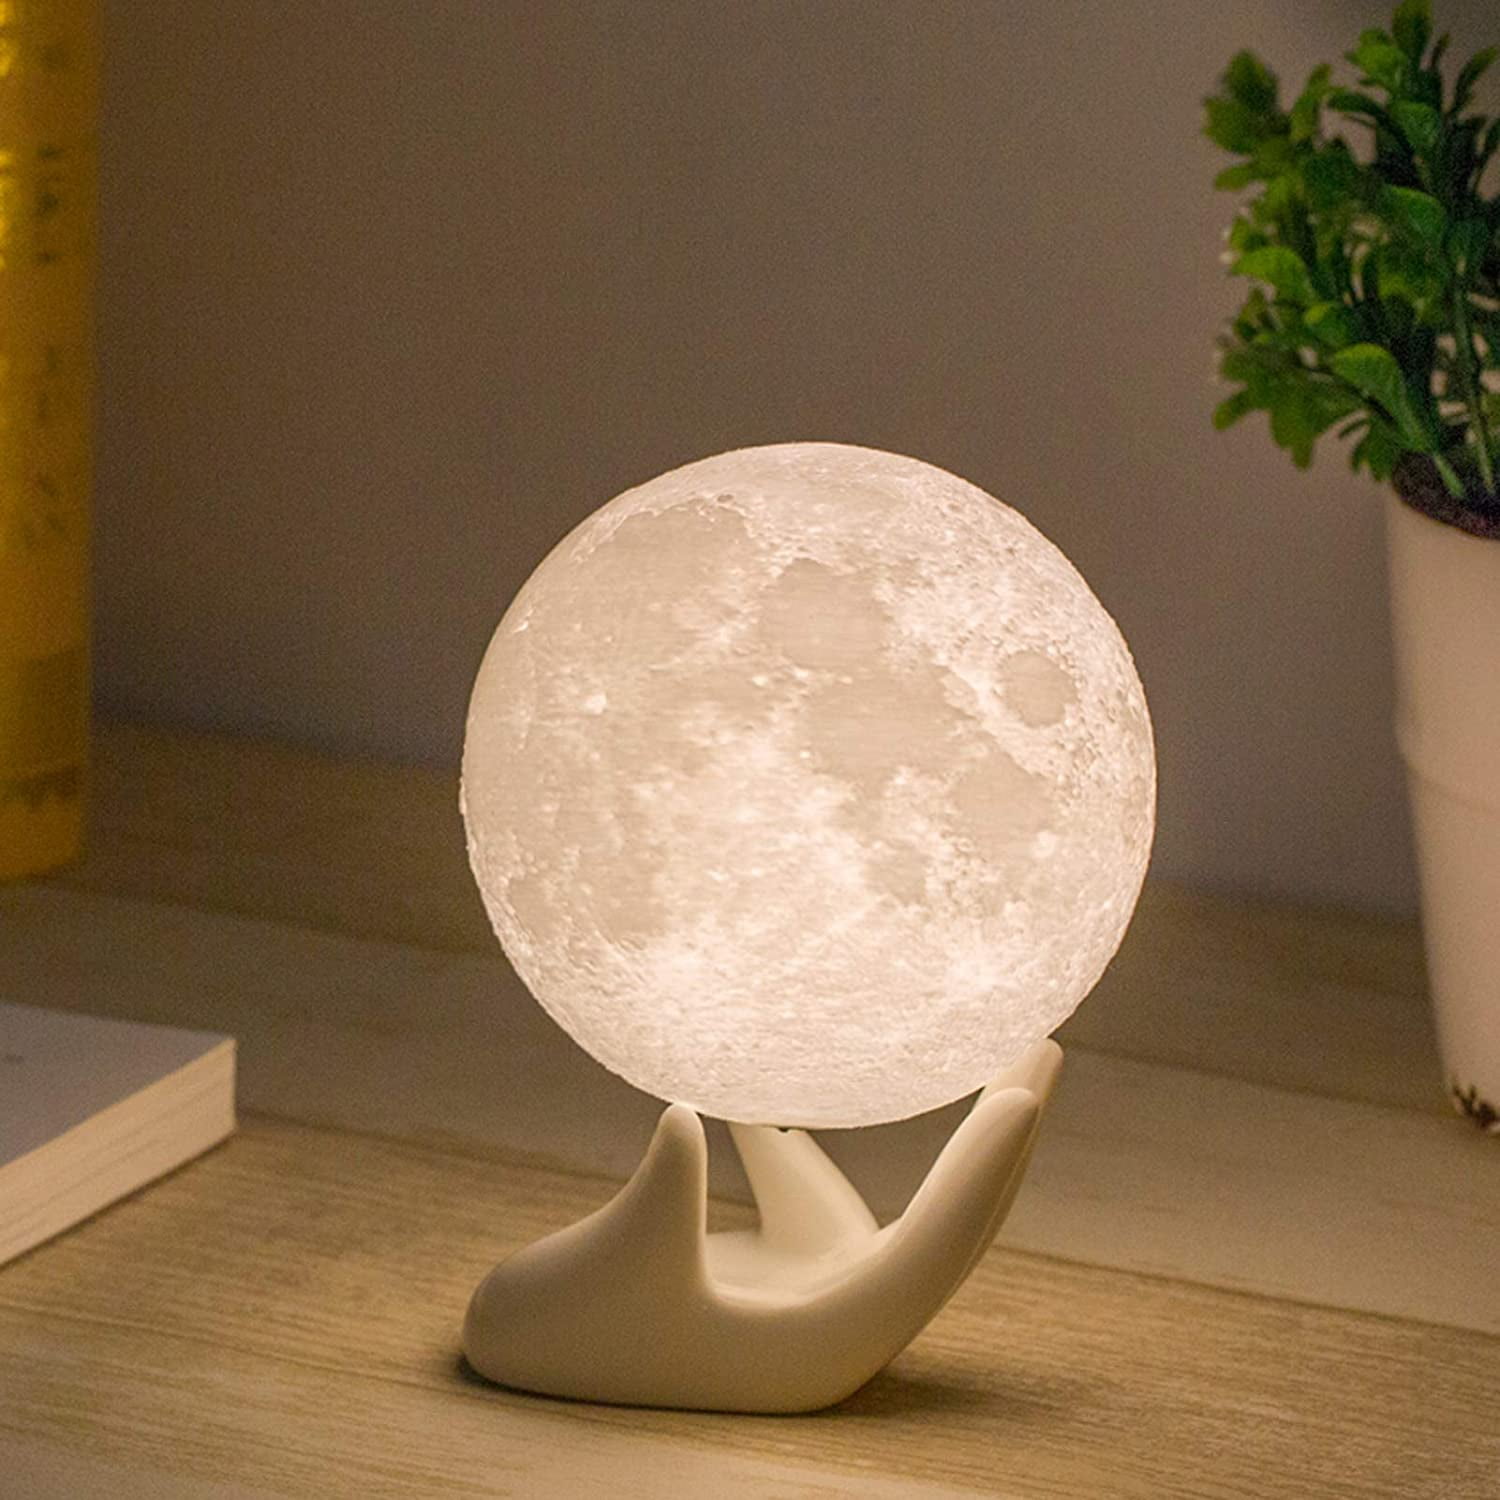 3D Printing LED Luna Night Light Moon Lamp Touch Control USB Charging Gift 